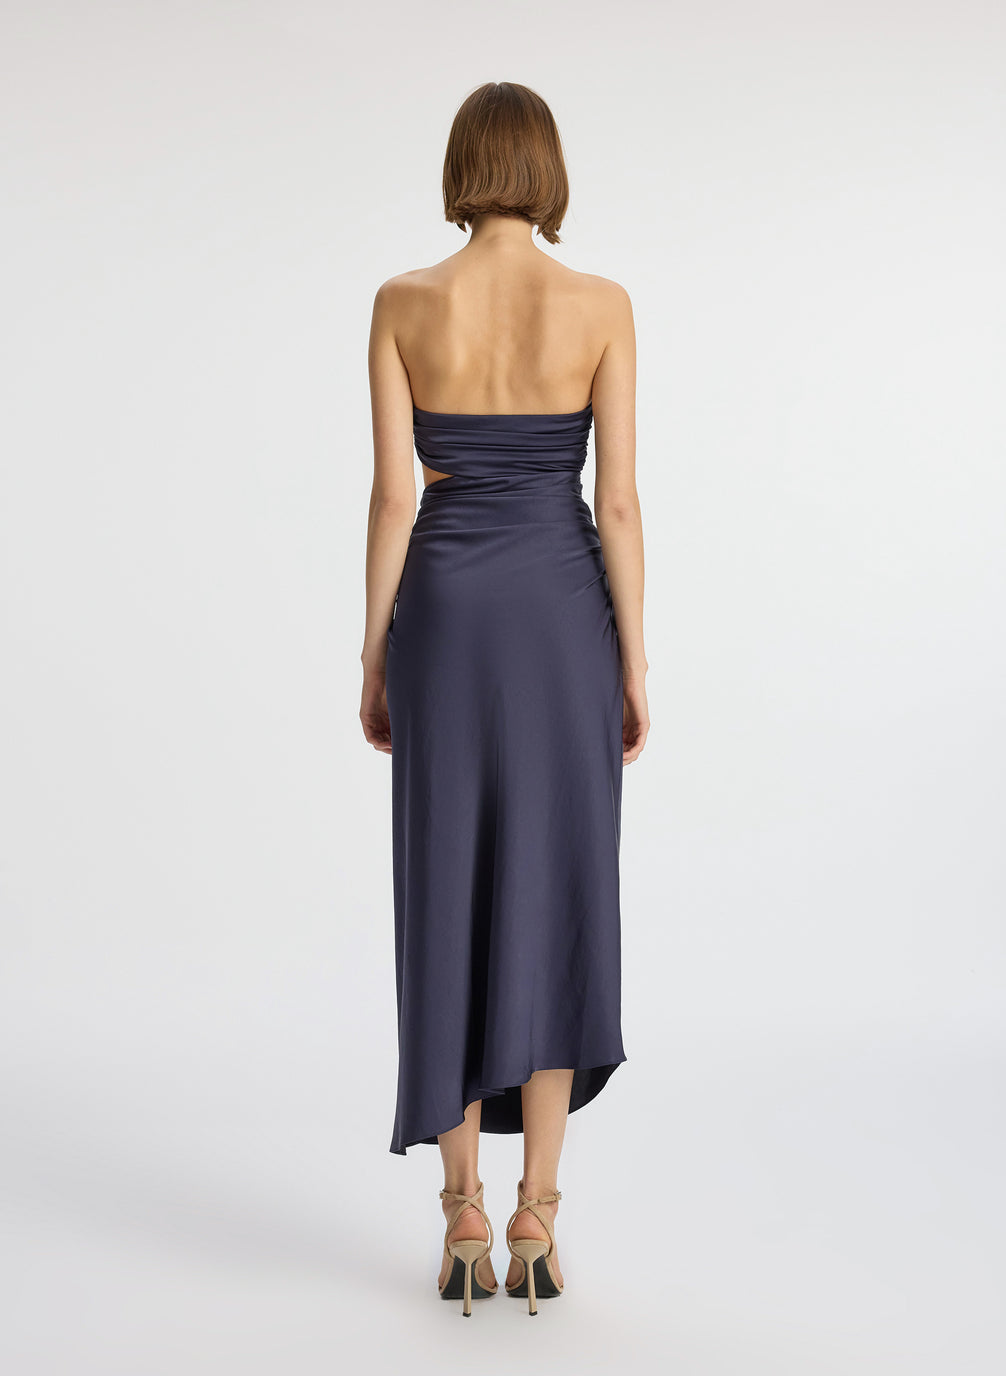 back view of woman wearing navy blue strapless midi dress